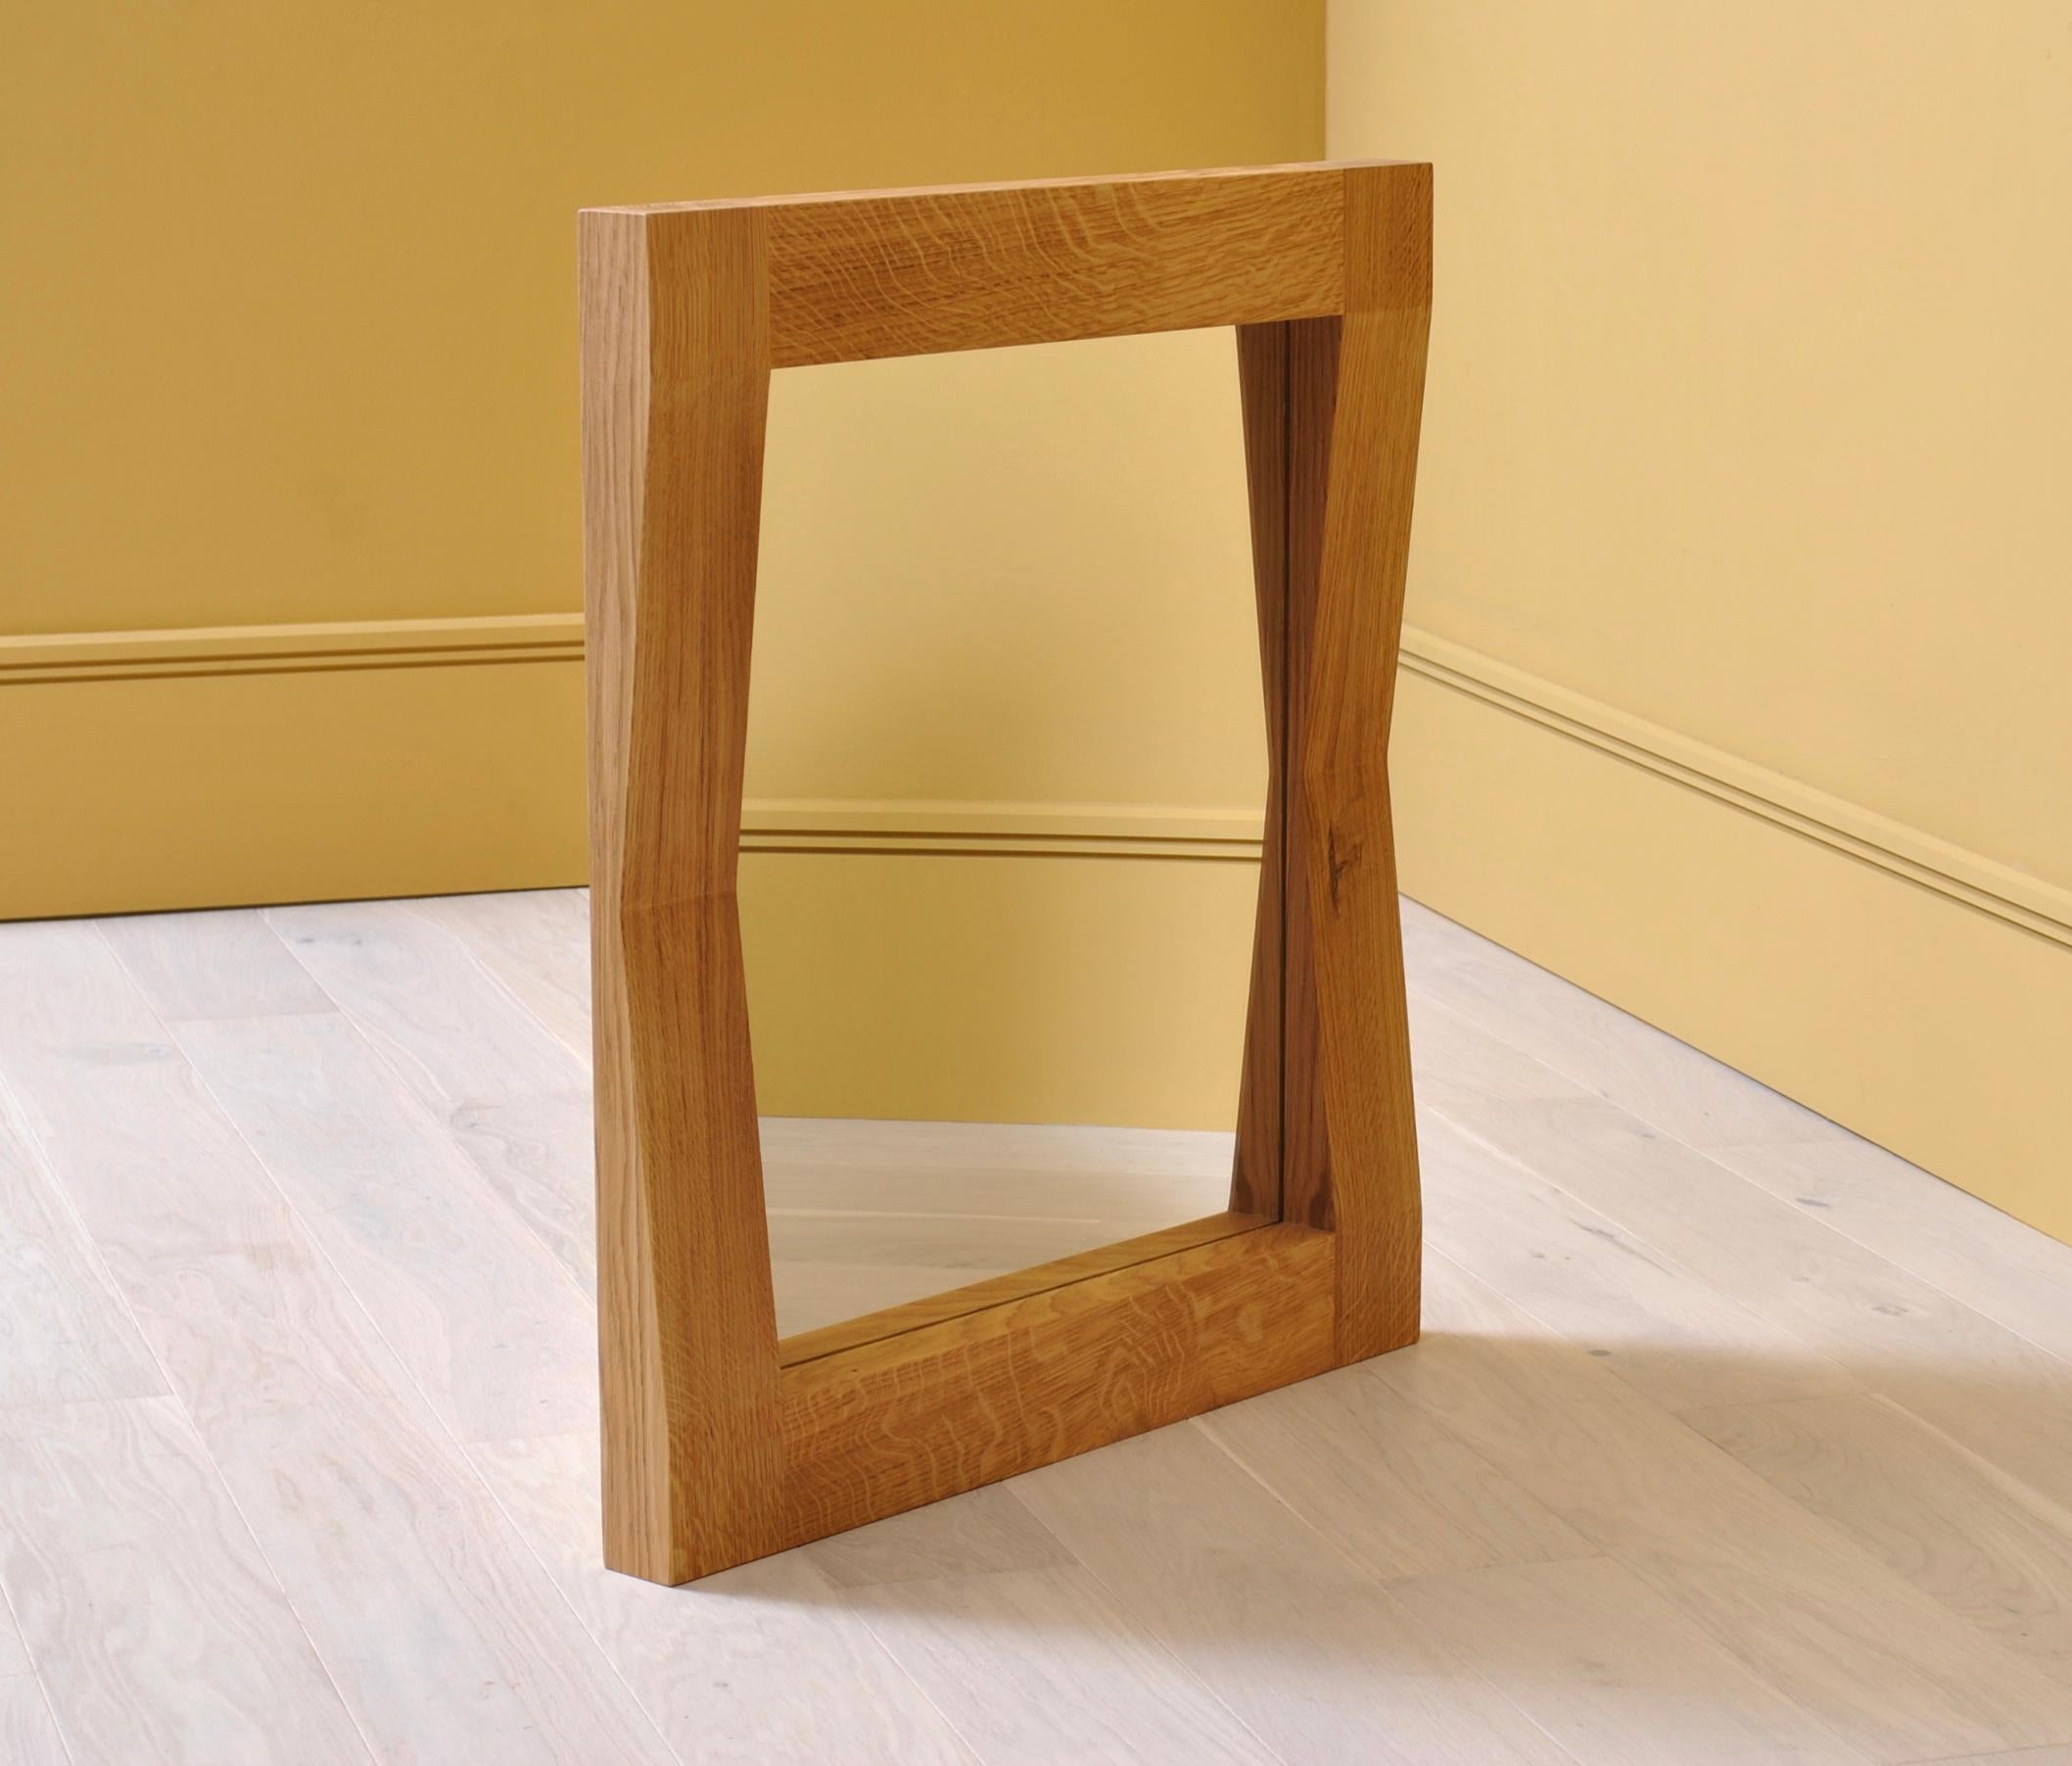 Large handcrafted ‘furrow’ oak framed mirror. Designed by SUM furniture and handcrafted using traditional techniques in finest fully quartersawn English oak. Hand finished in natural oils. The furrow mirror has a striking presence and gives the